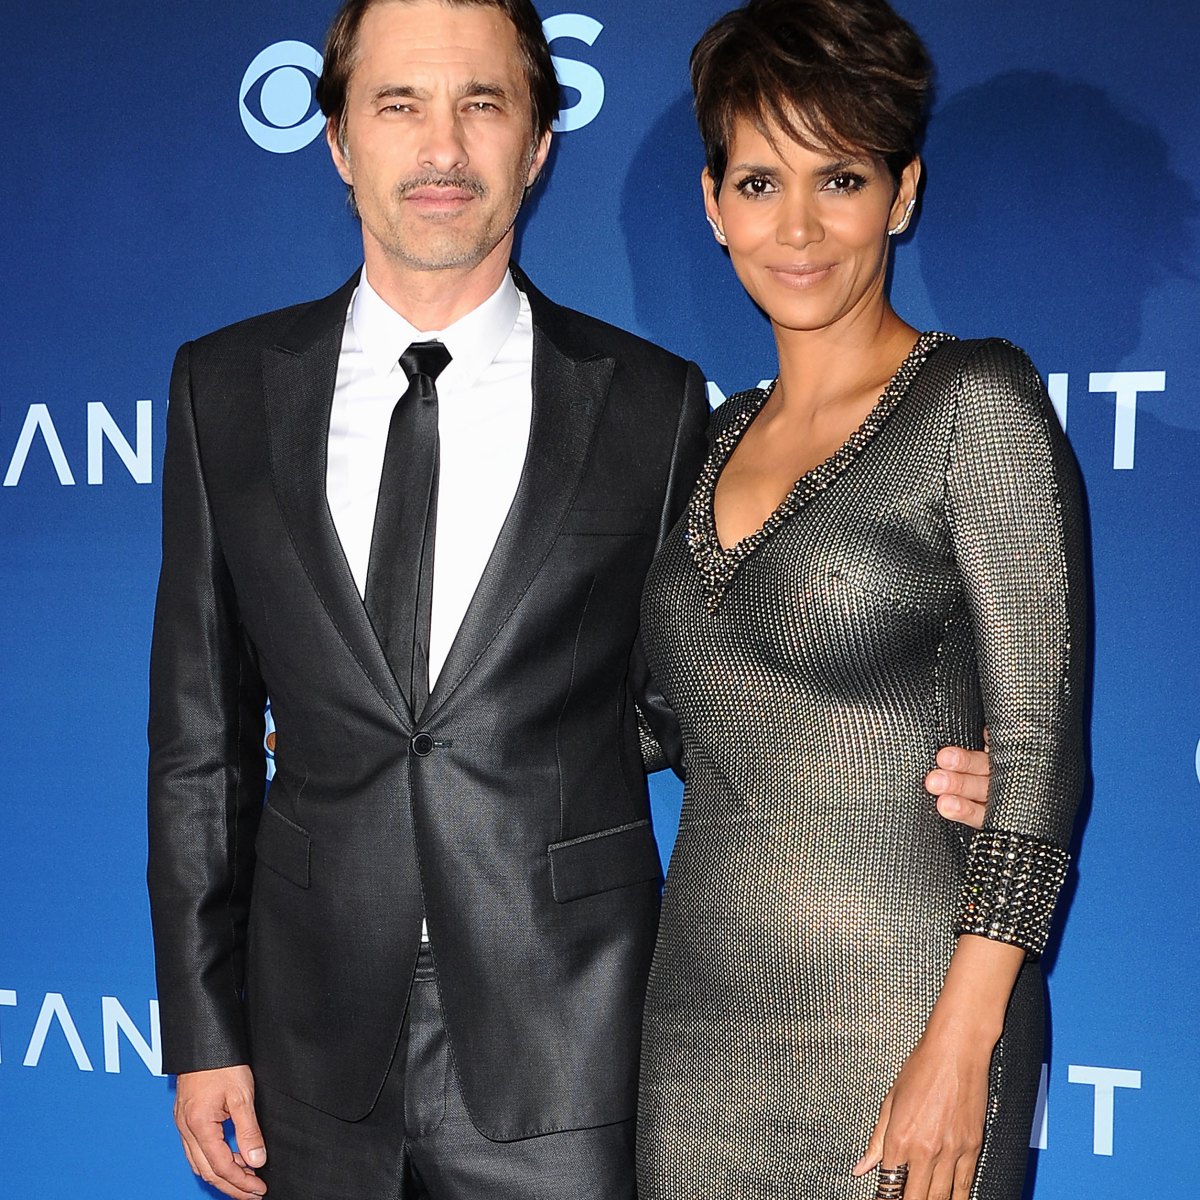 How many husbands has halle berry had?